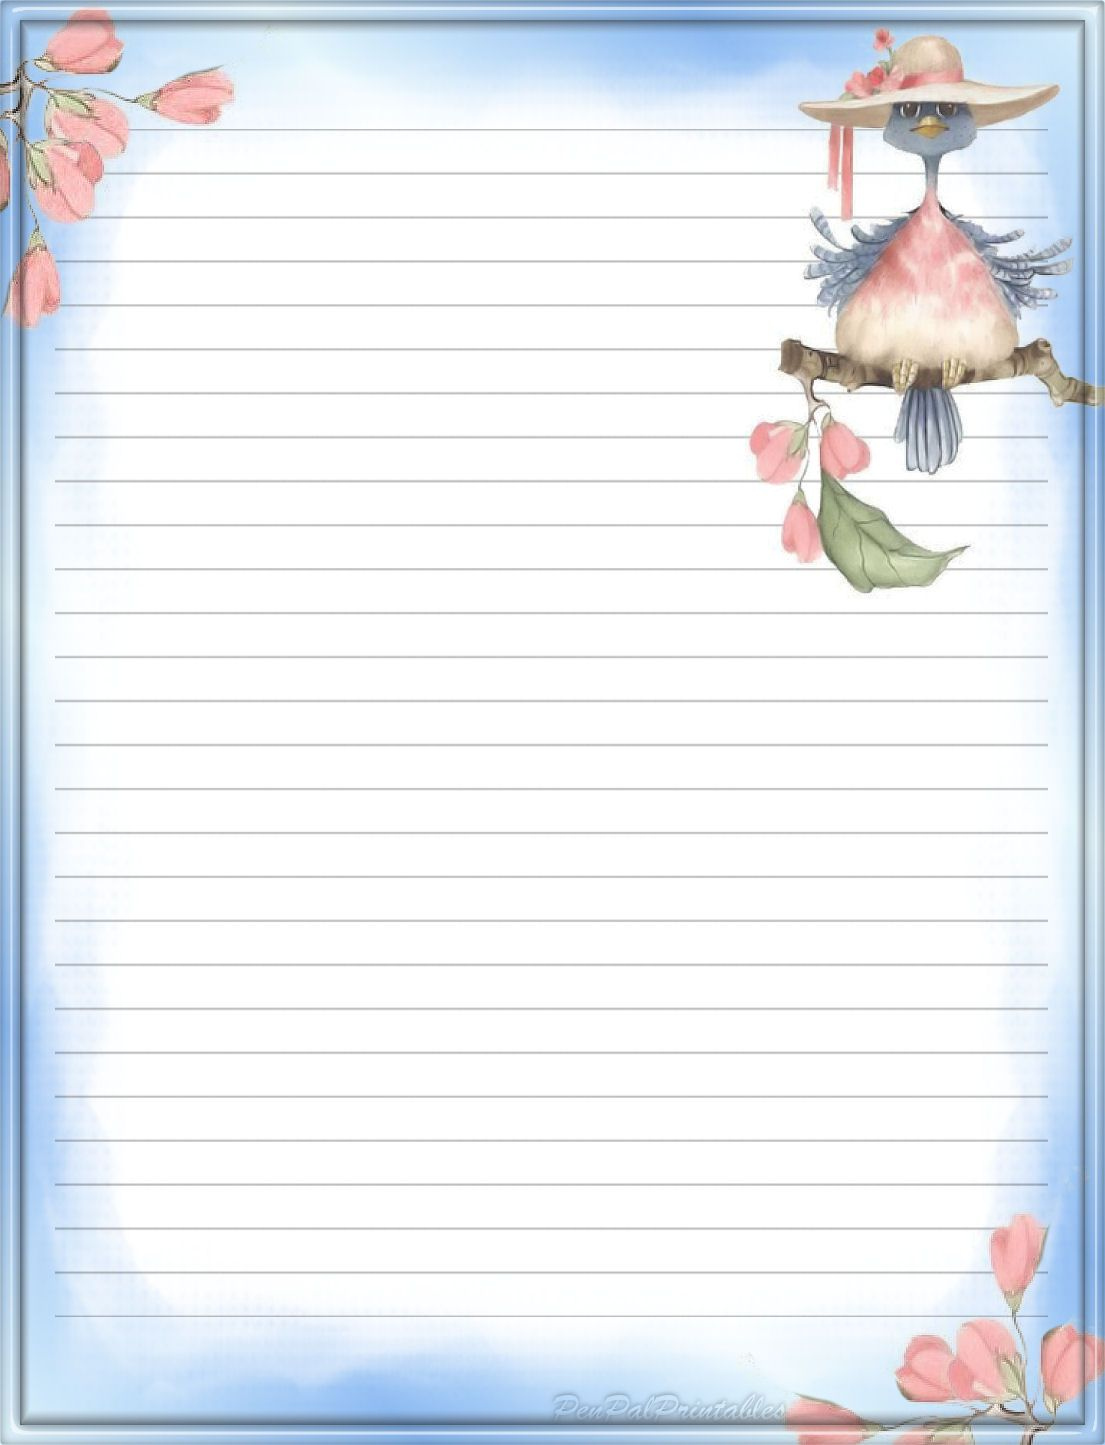 Blue Bird Lined Writing Paper Printable Stationery Free Printable 